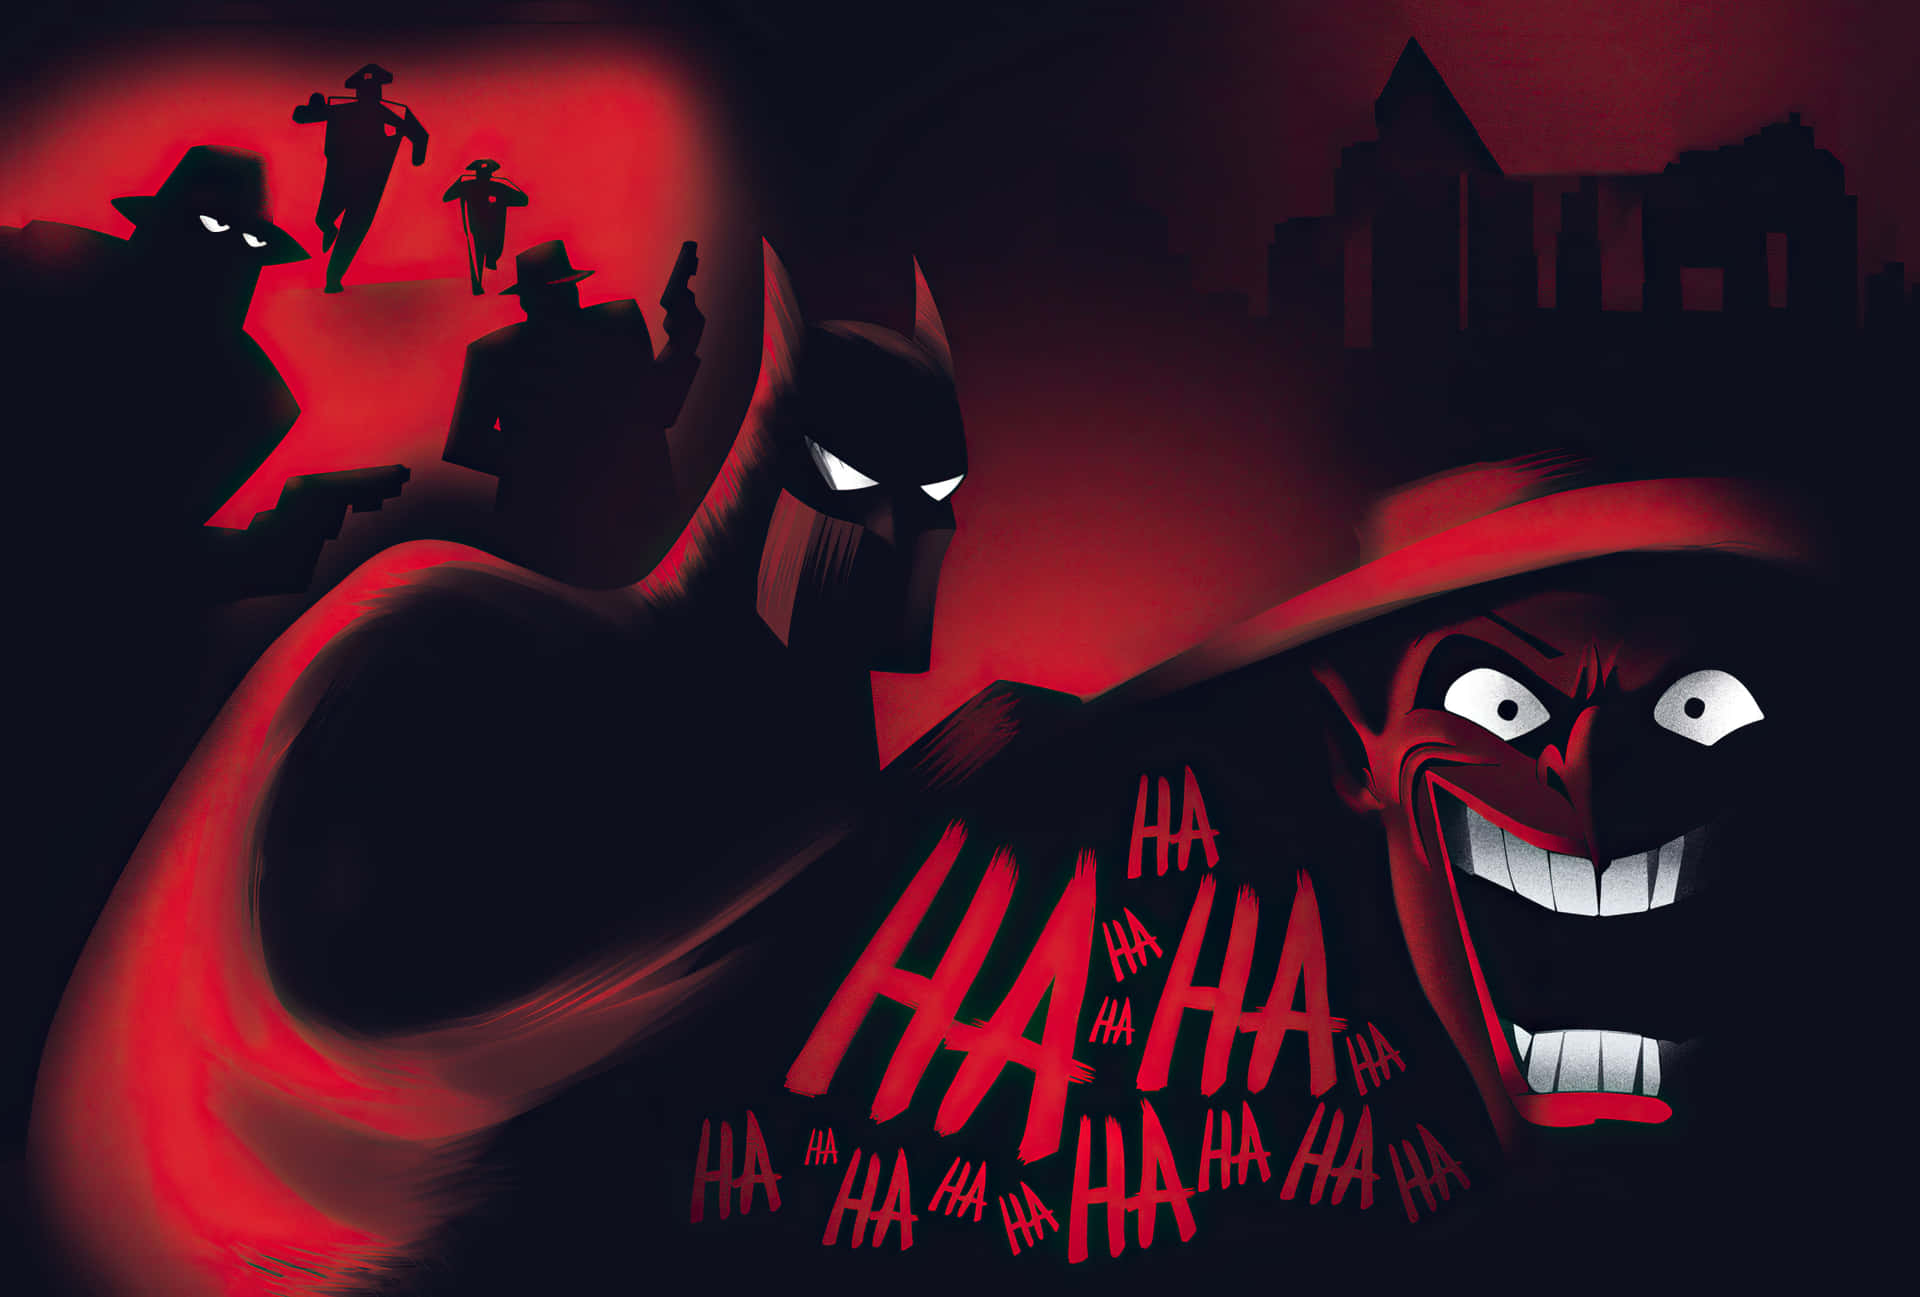 Batman and Robin preparing for action in the dark streets of Gotham City Wallpaper